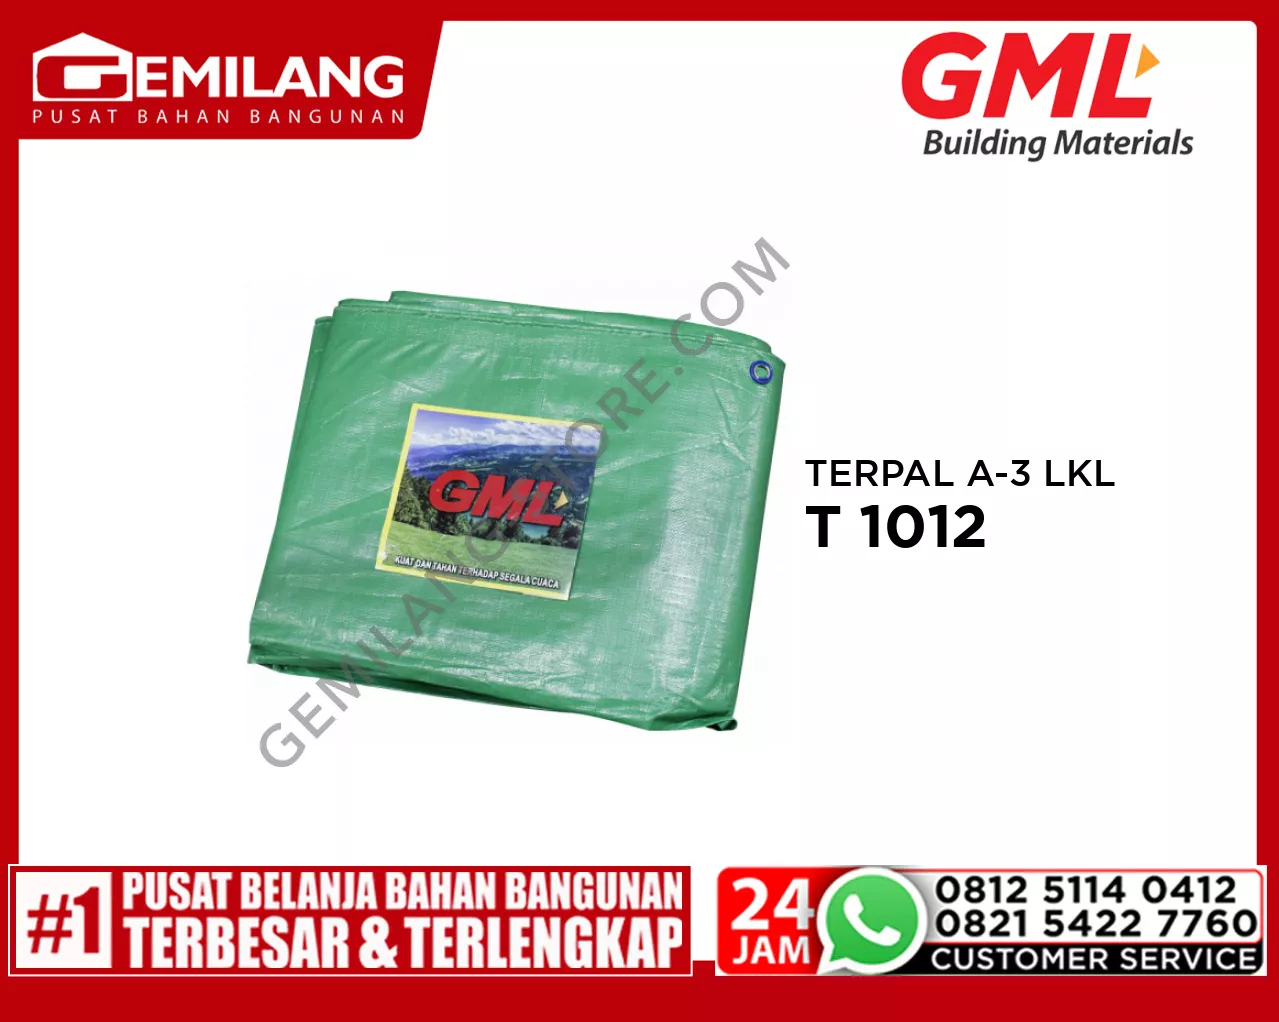 TERPAL A-3 LOKAL T 1012